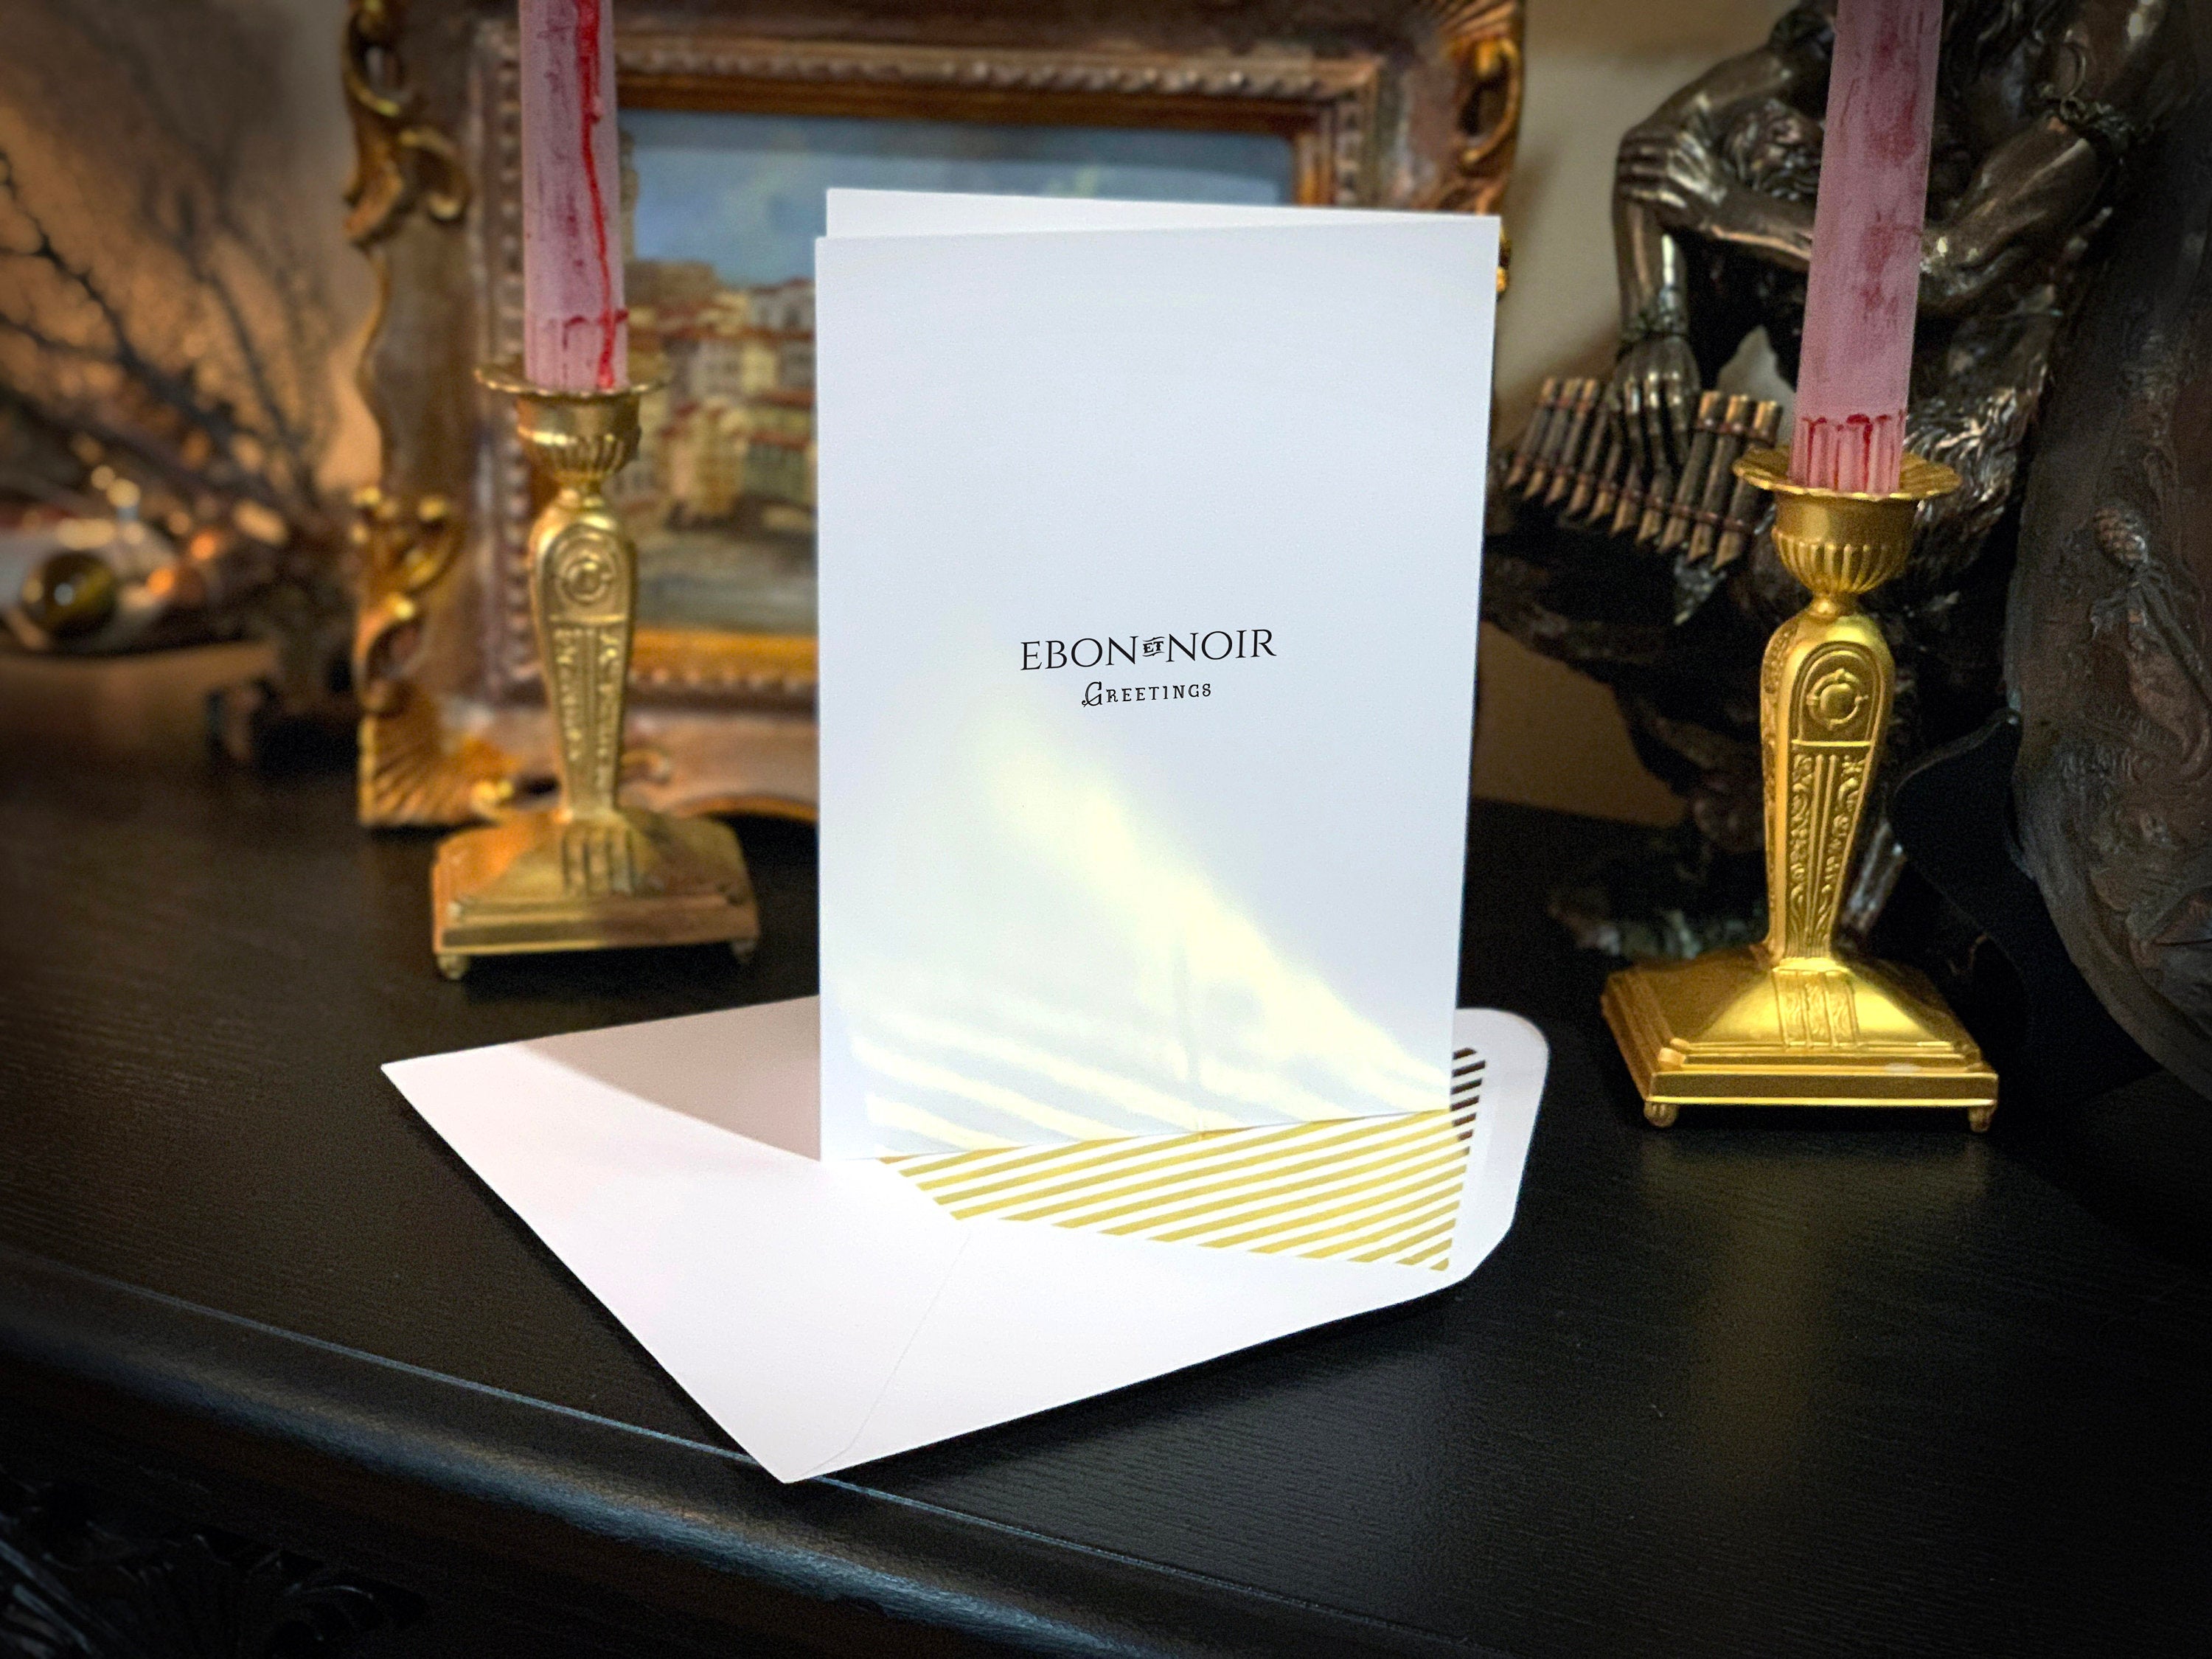 The Best Dad, Father's Day Greeting Card with Elegant Striped Gold Foil Envelope, 1 Card/Envelope